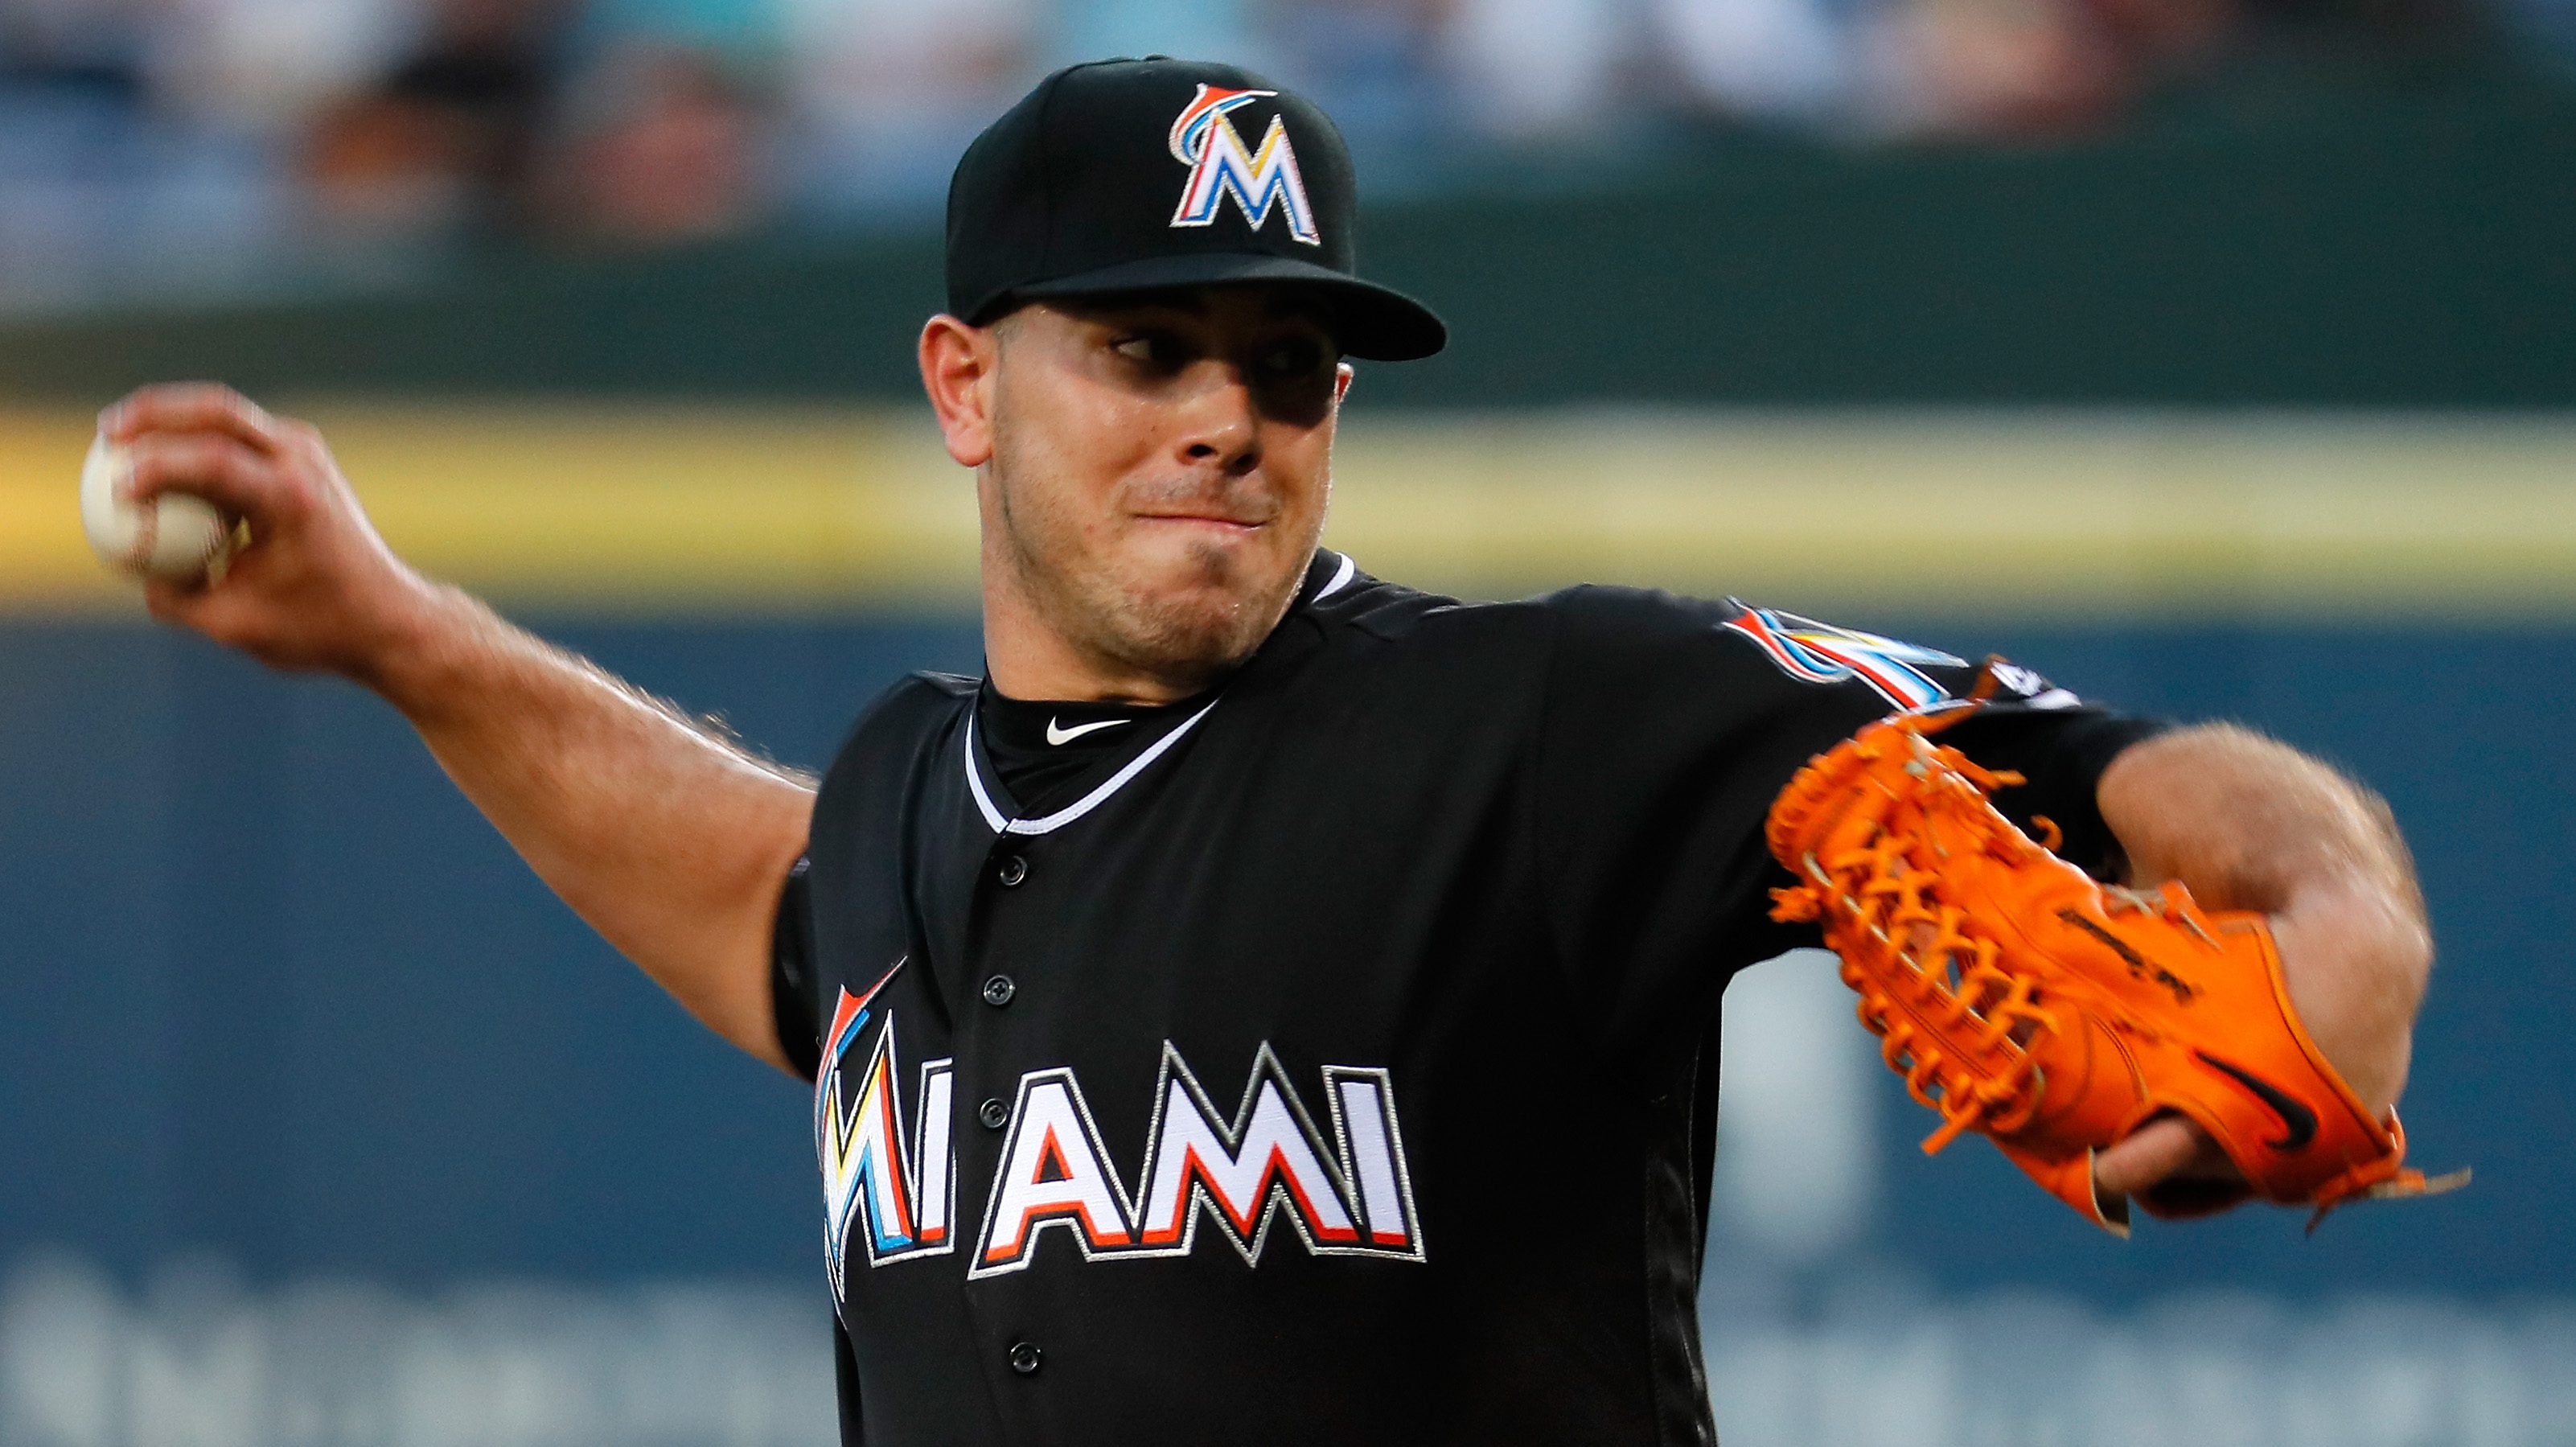 jose fernandez dead, jose fernandez death, jose fernandez boating accident